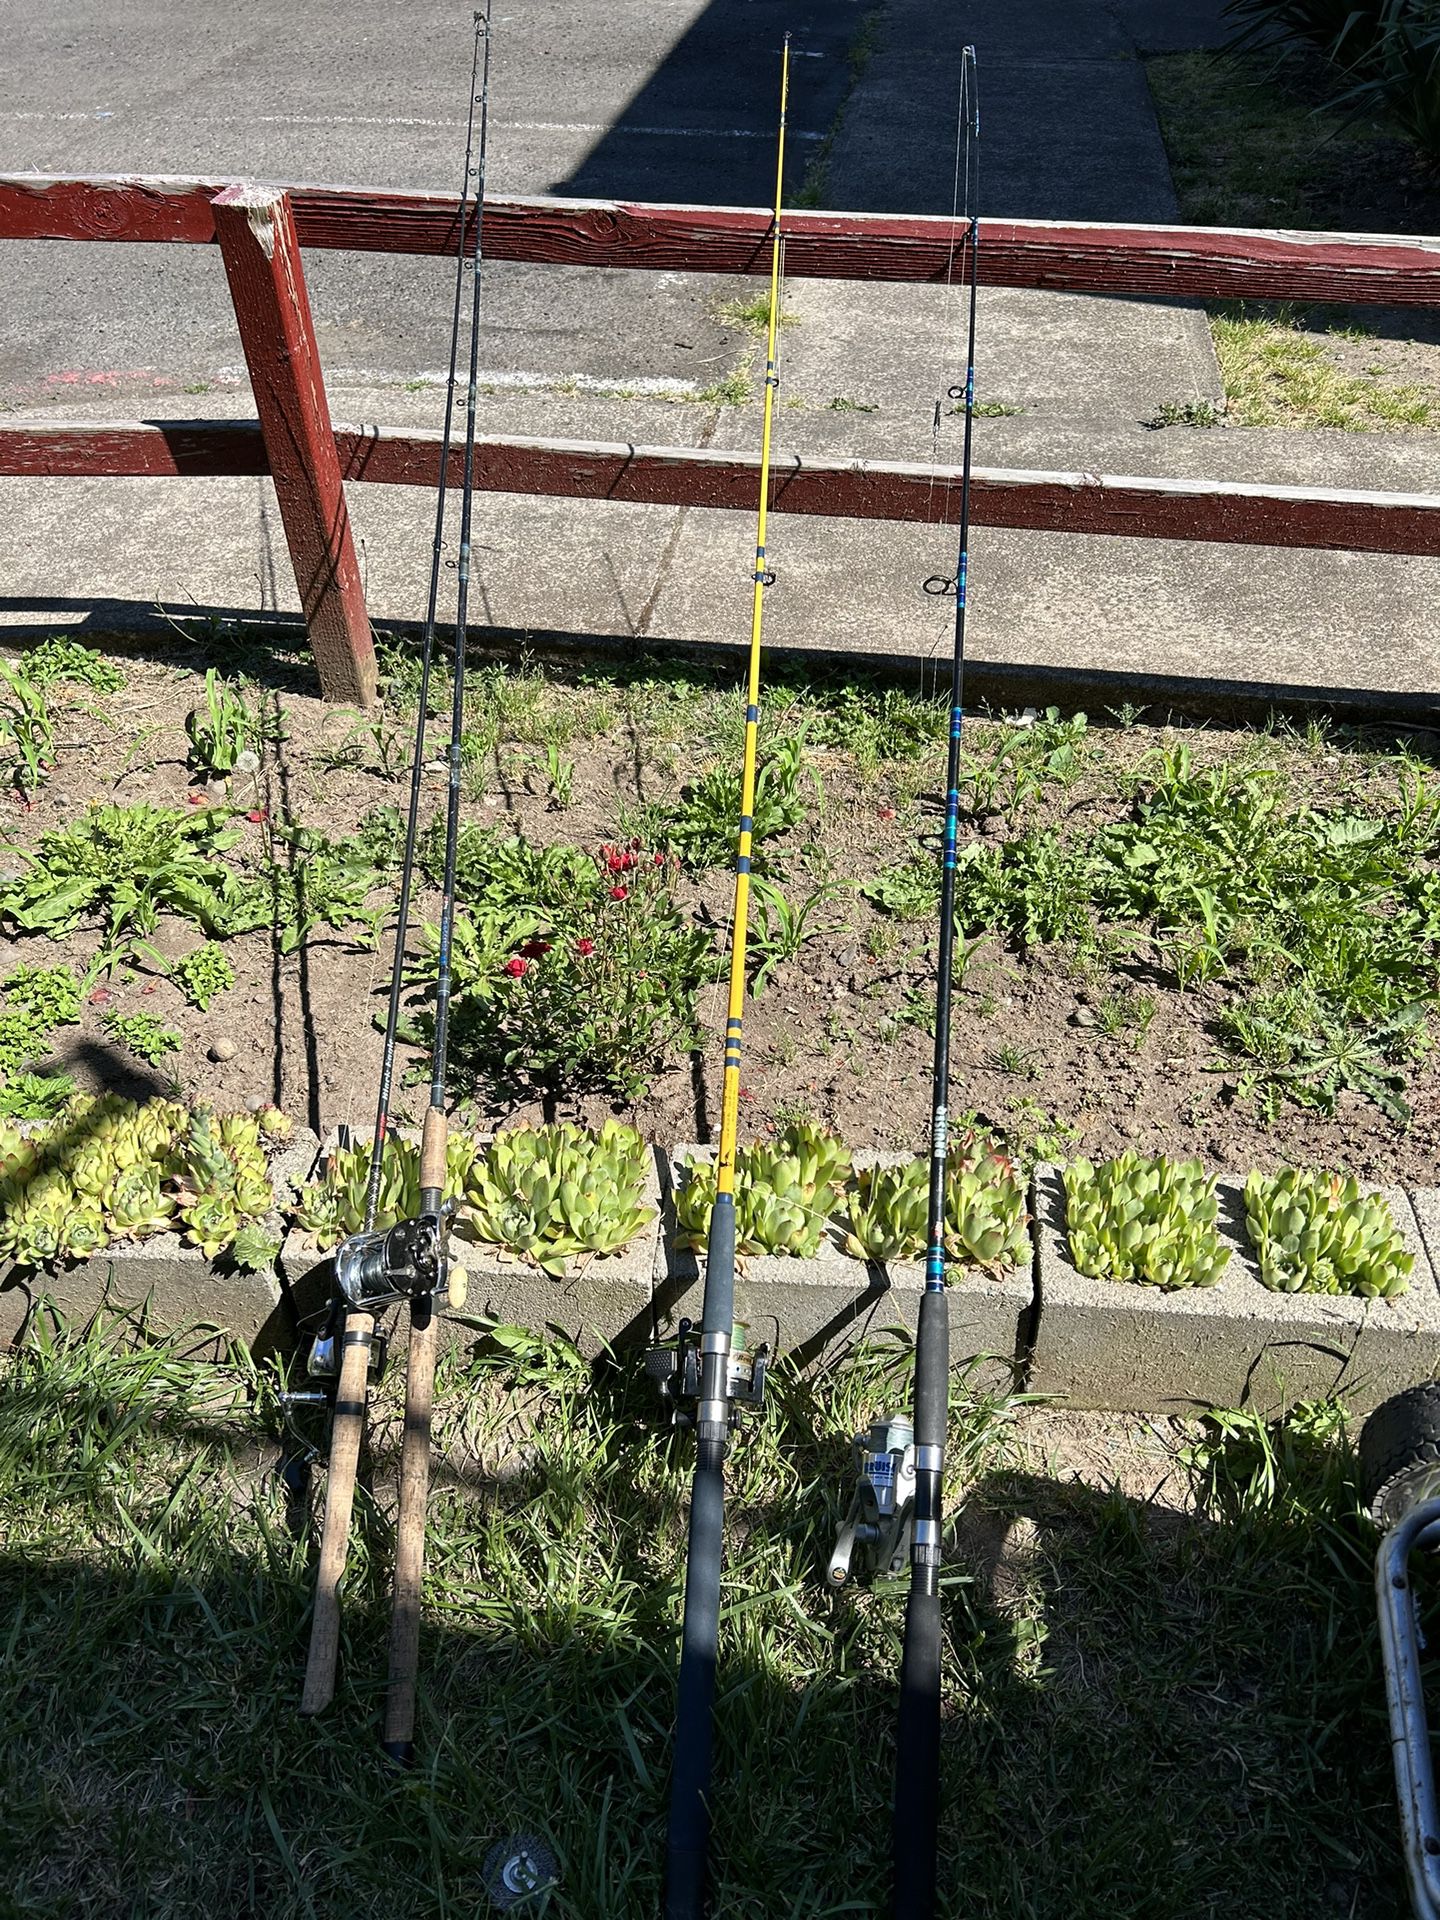 fishing rods for Sale in Tigard, OR - OfferUp